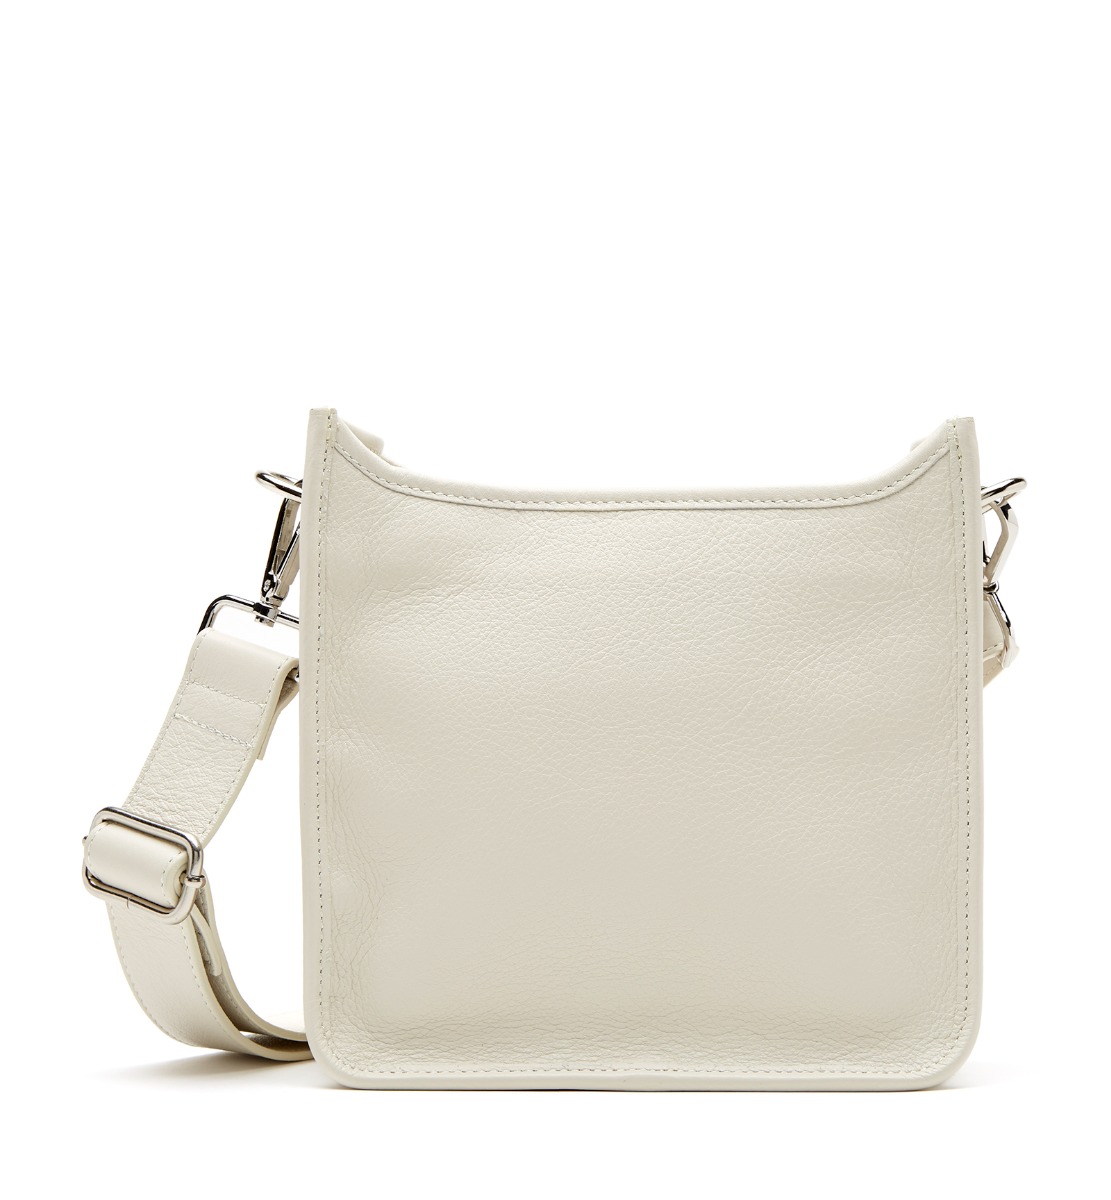 La Canadienne Oggy Leather Bag In White